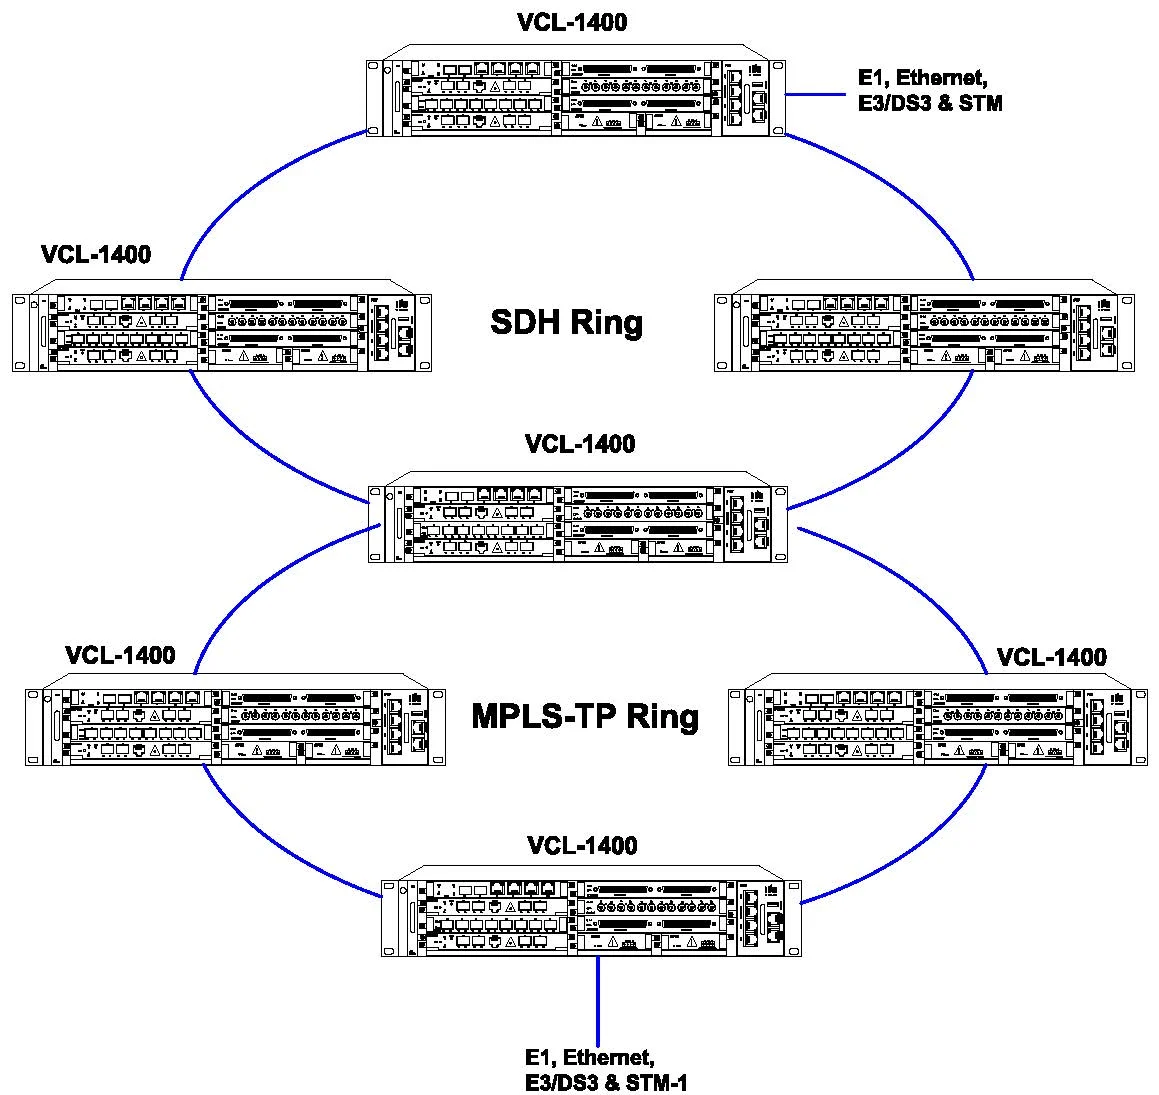 SDH and MPLS Mix Network